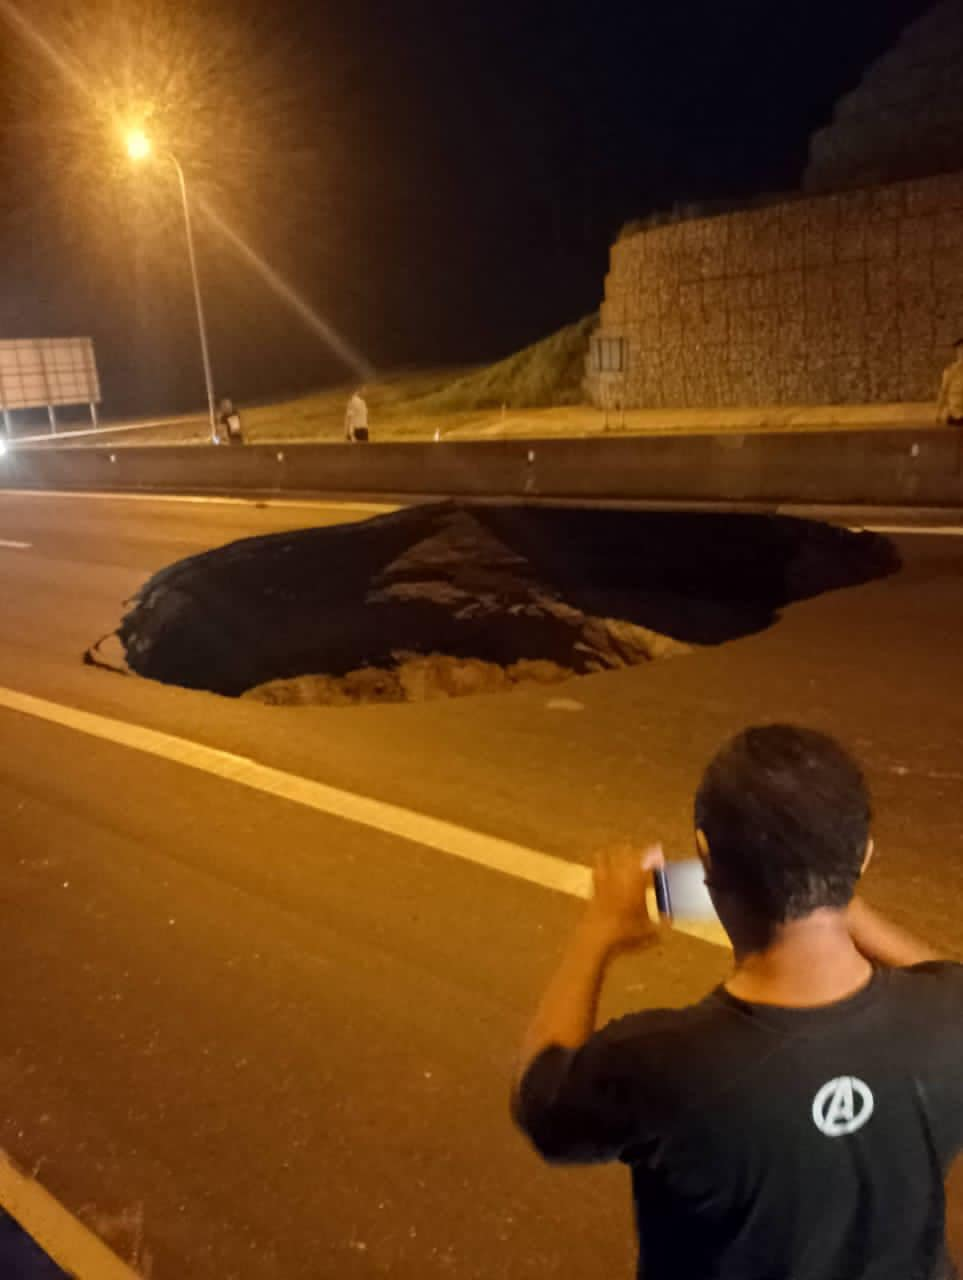 Giant sinkhole spotted at kl-karak highway due to underground tunnel works